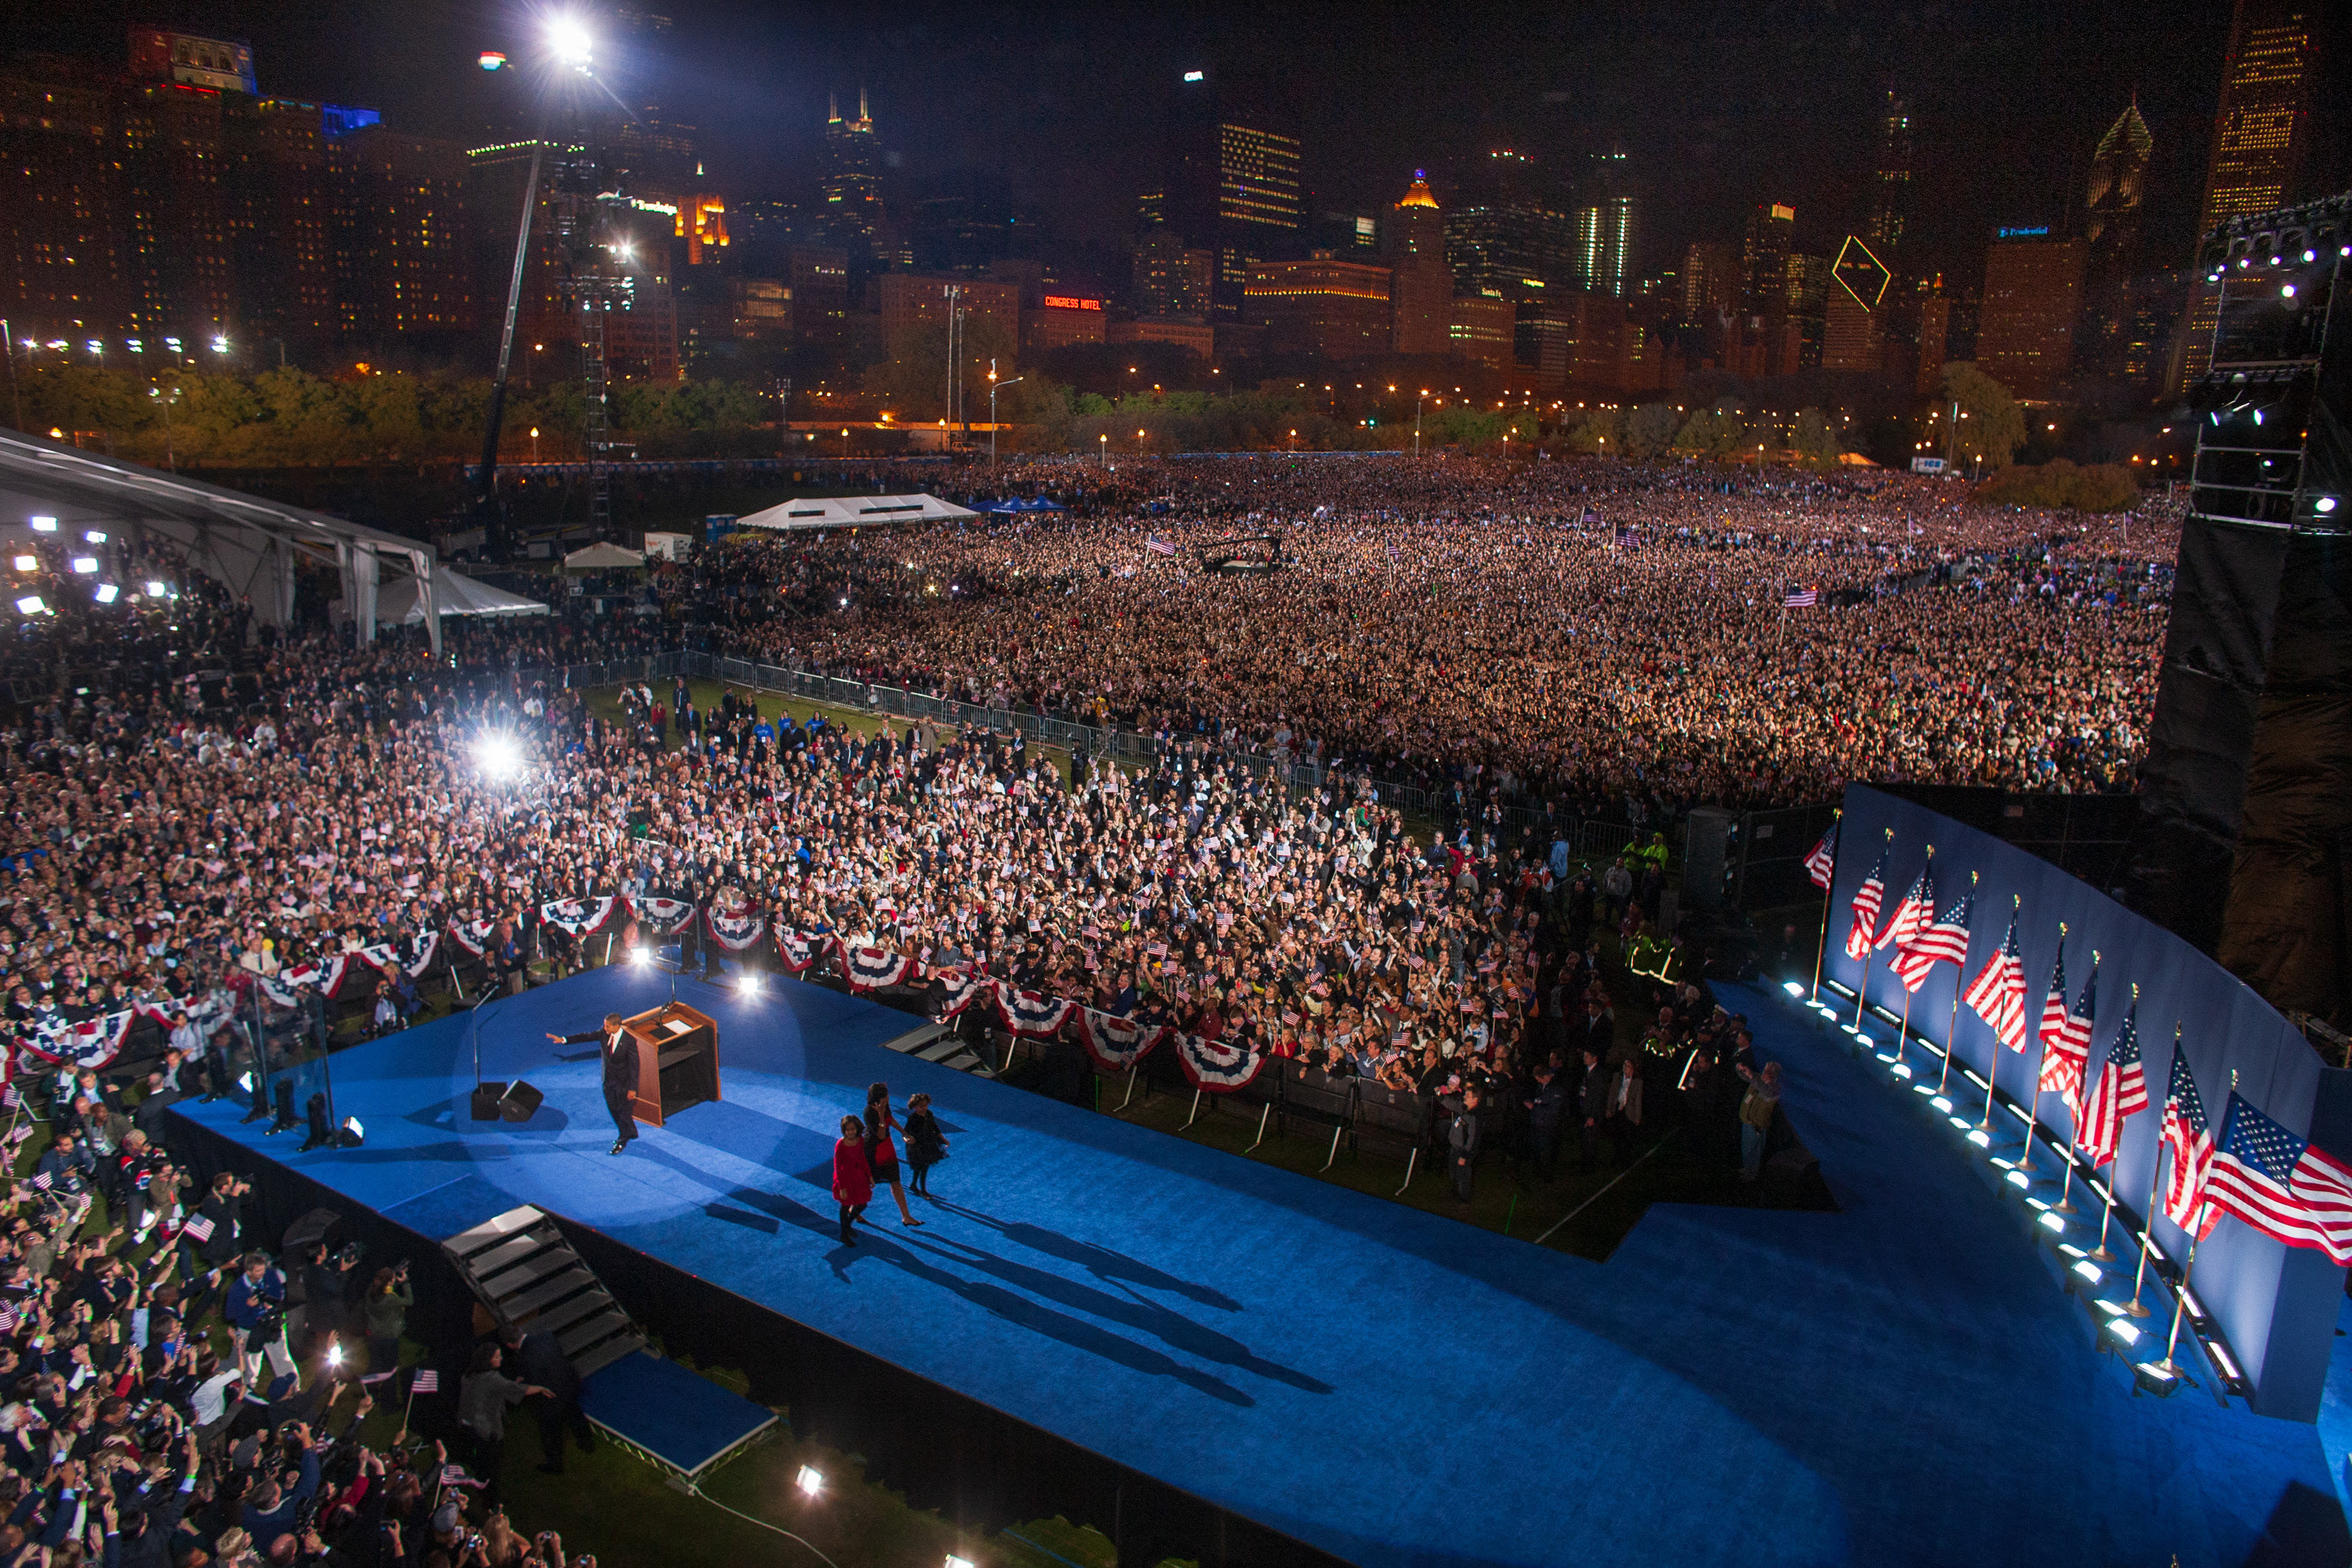 An aerial shot of the crowd at Grant Park on Election Night 2008 with President Obama at the podium waving at the crowd and Mrs. Obama walking off the stage with Sasha and Malia Obama.